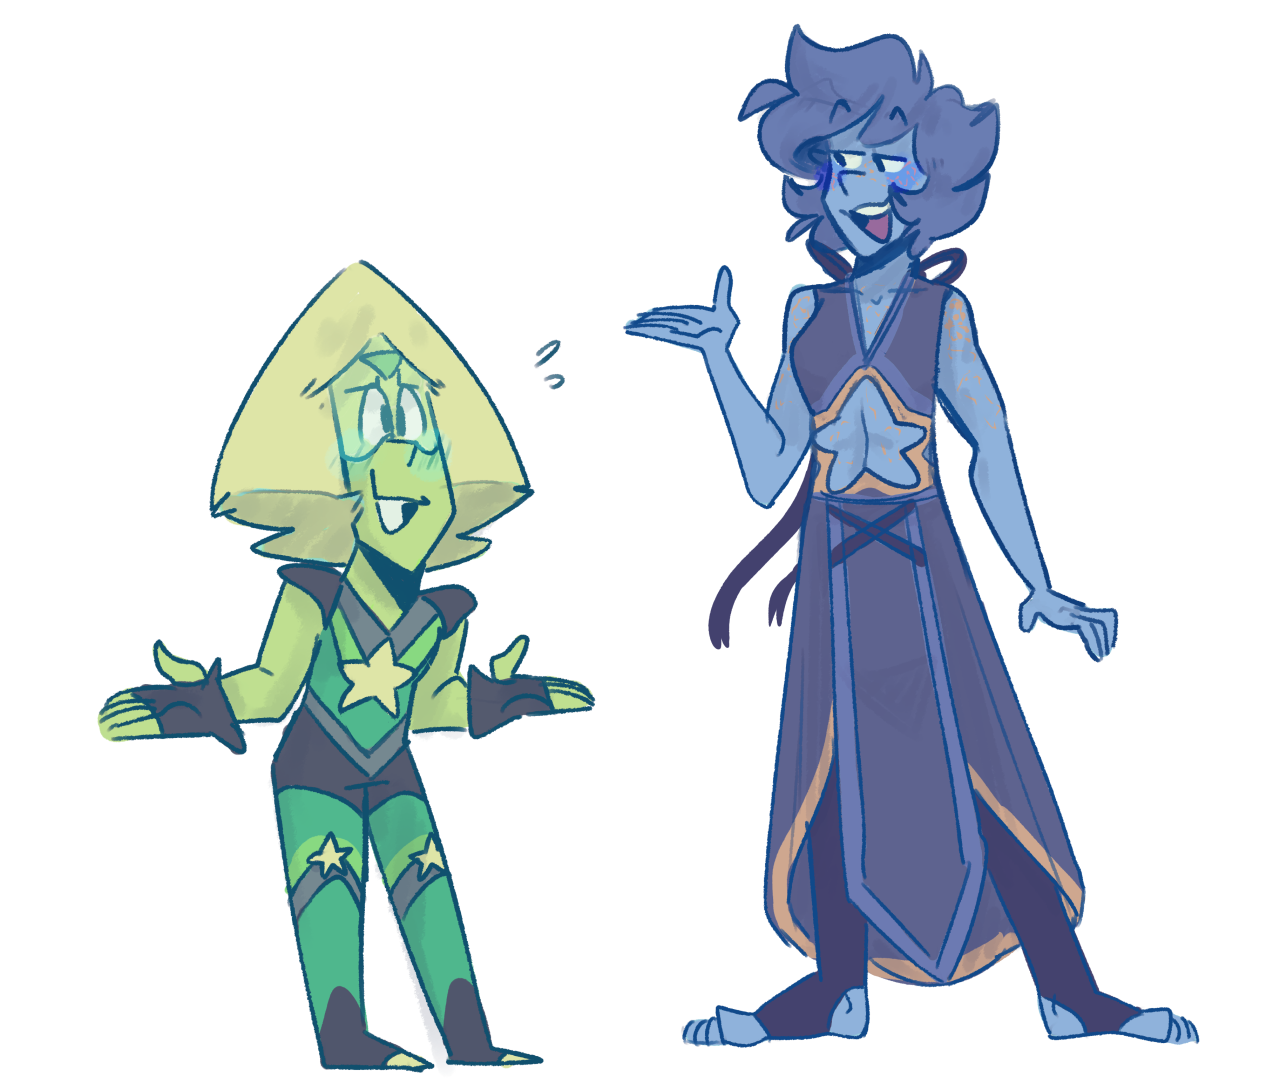 magliaim said: If you're still doing those redesigns, what about Peridot and Lapis from Steven Universe? I'm interested about your take on them! (And maybe them in crystal gems clothes, their...